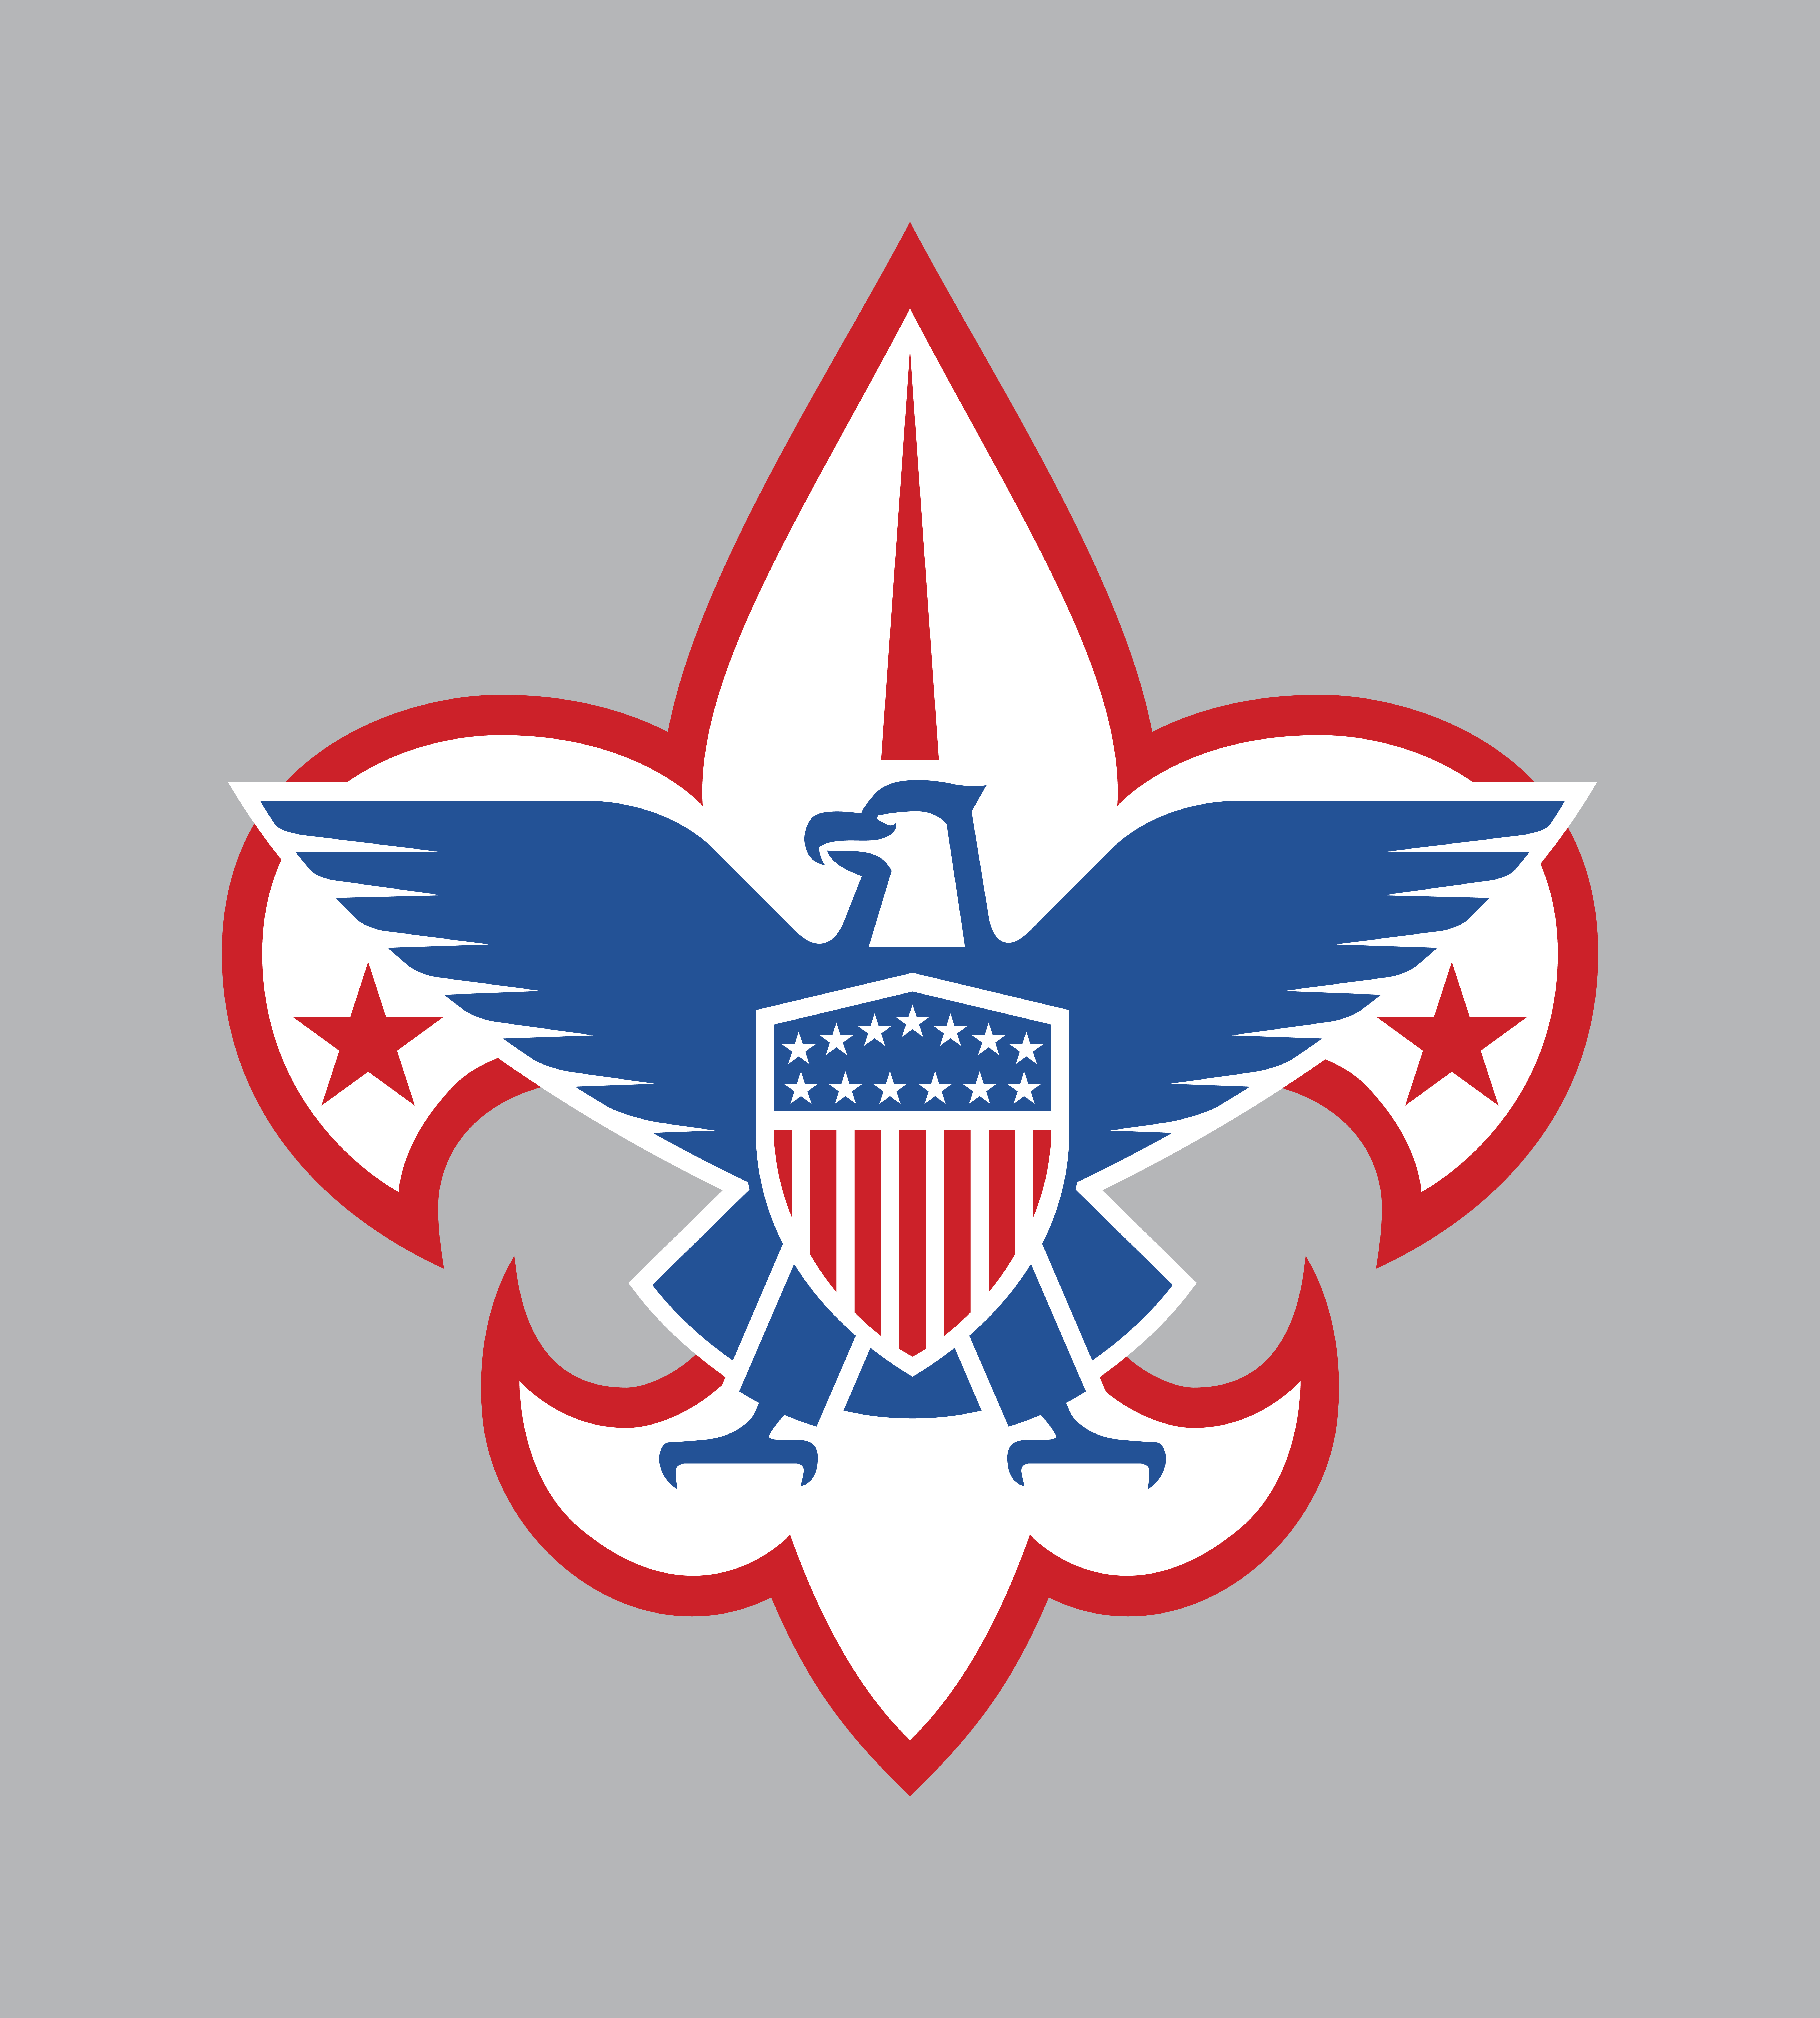 Boy scouts of america logo clipart